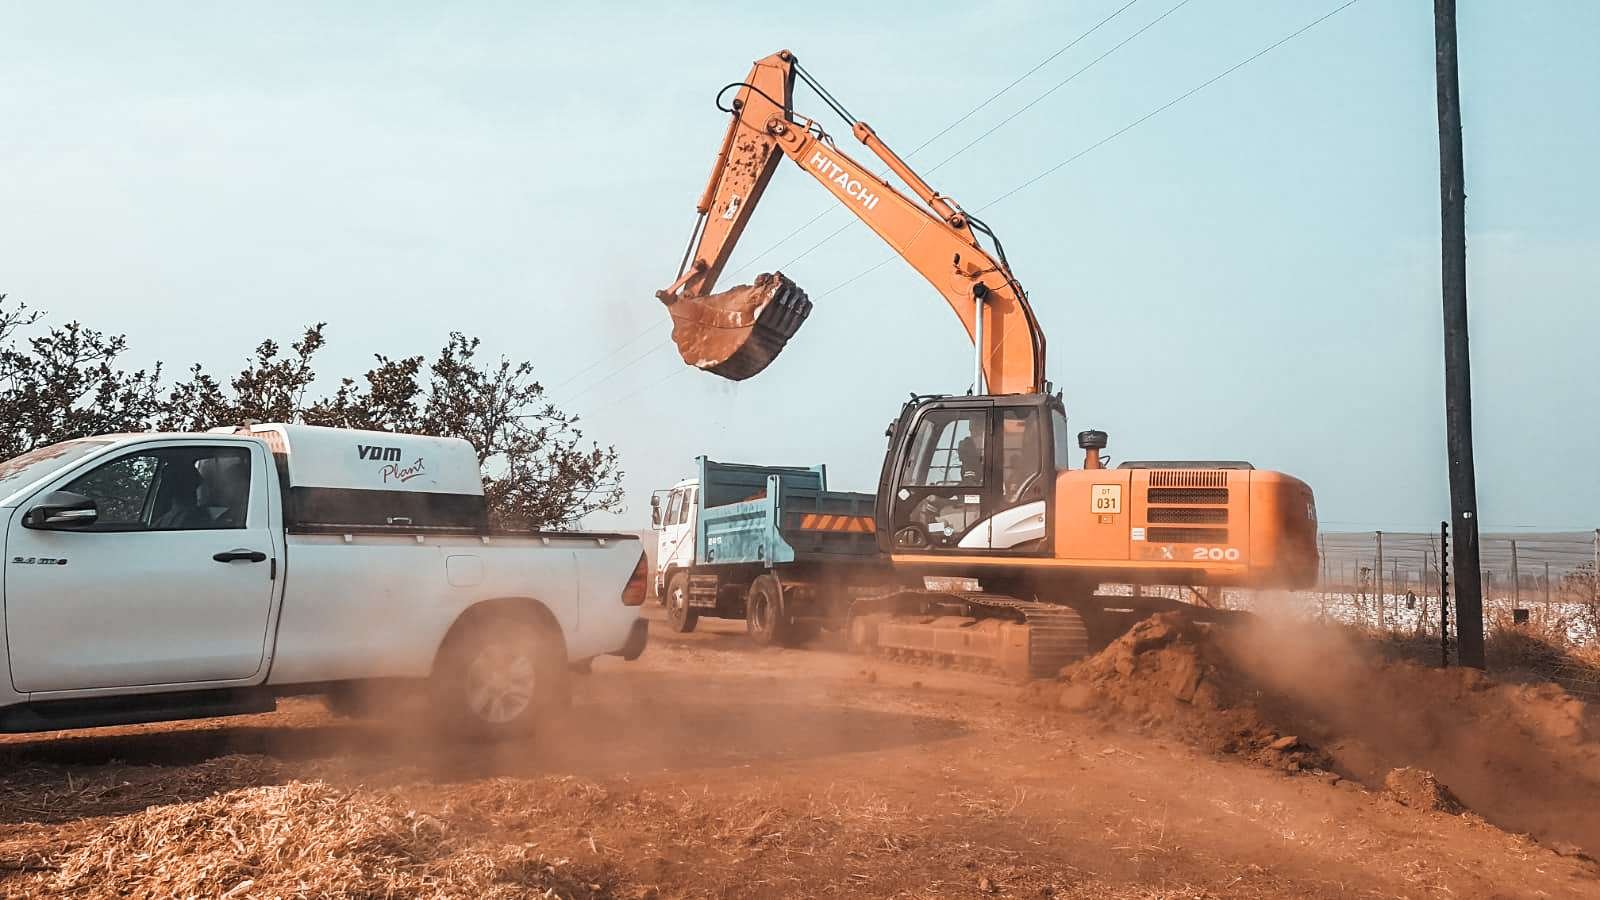 Heavy machinery at work: an excavator from VDM Plant Hire loading material into a dump truck at a construction or excavation site, with a pickup truck nearby. Dust is rising from the activity